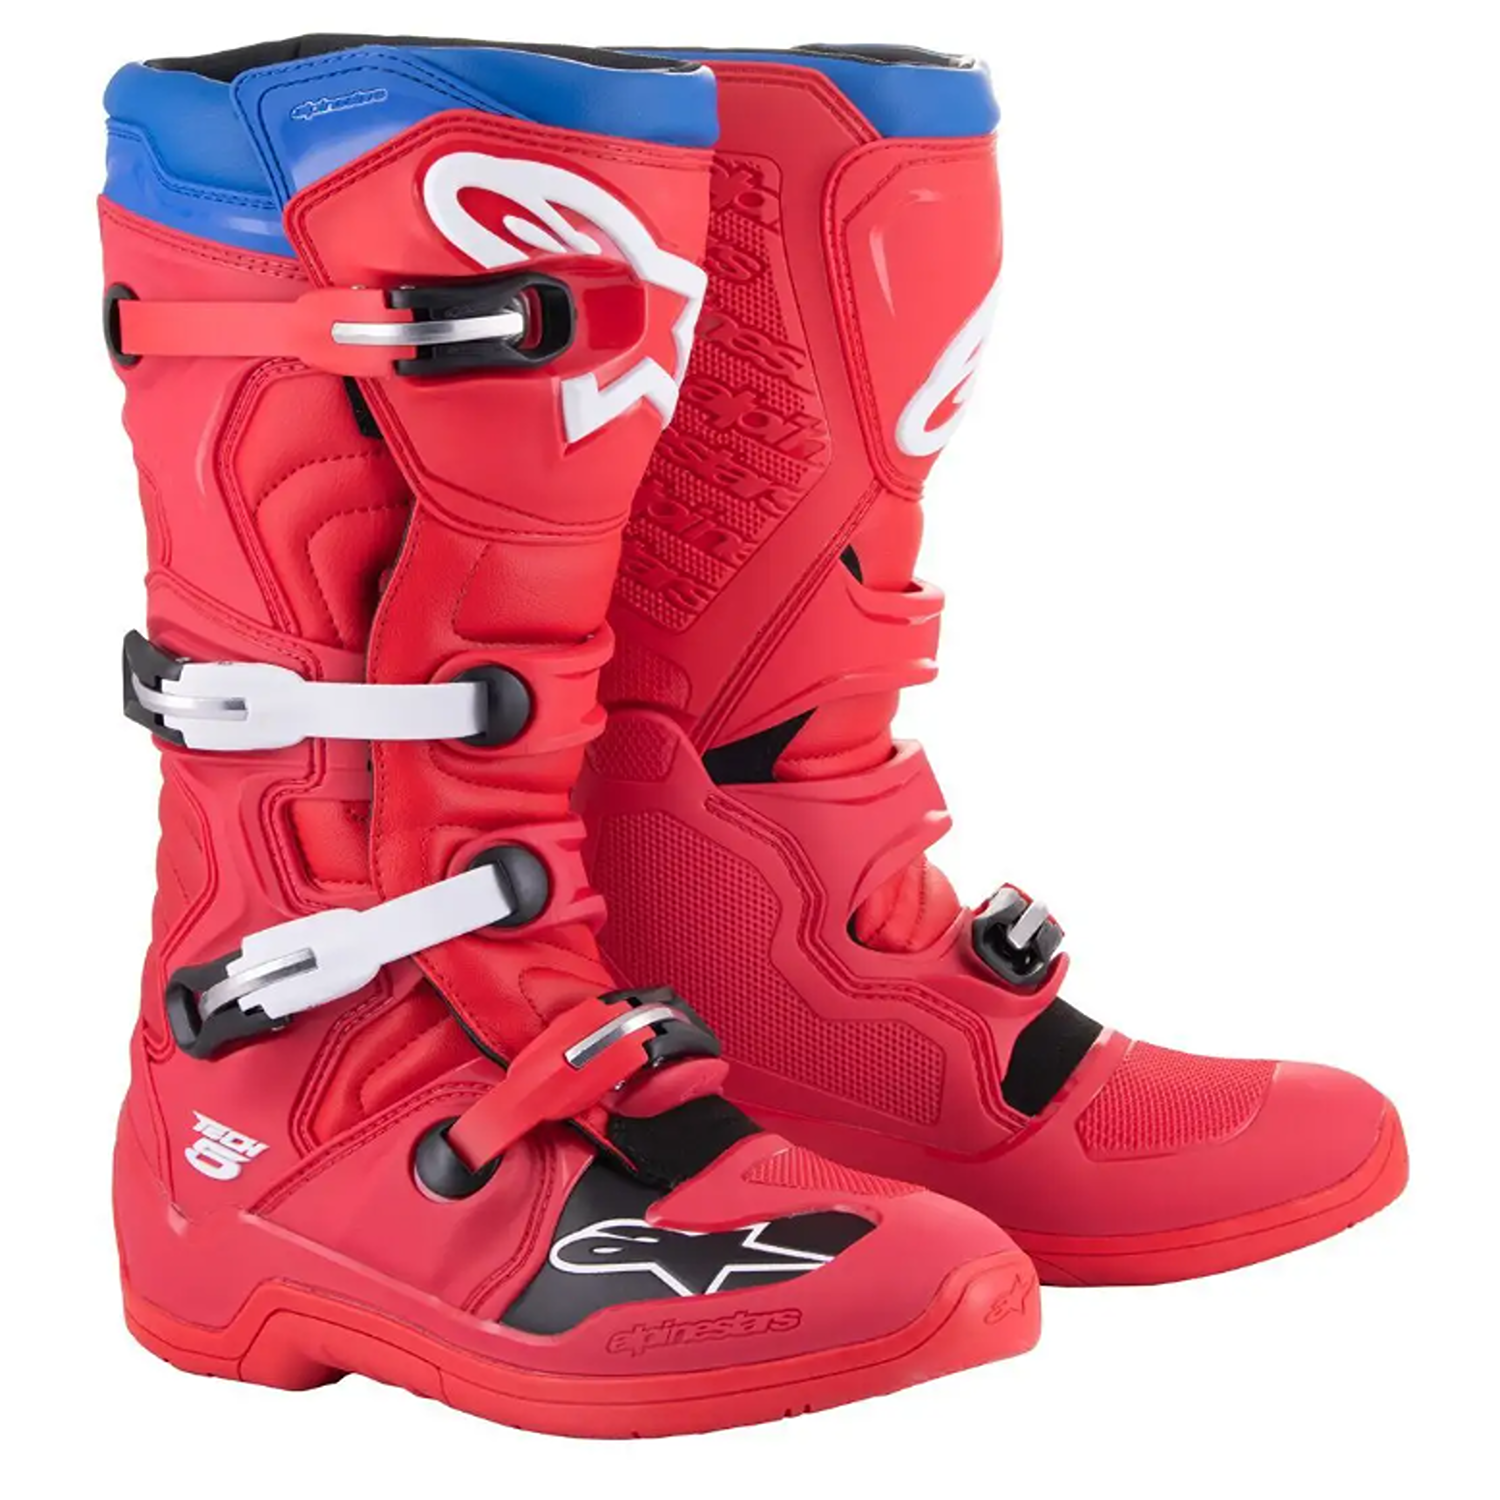 Image of Alpinestars Tech 5 Boots Bright Red Dark Red Blue Taille US 8